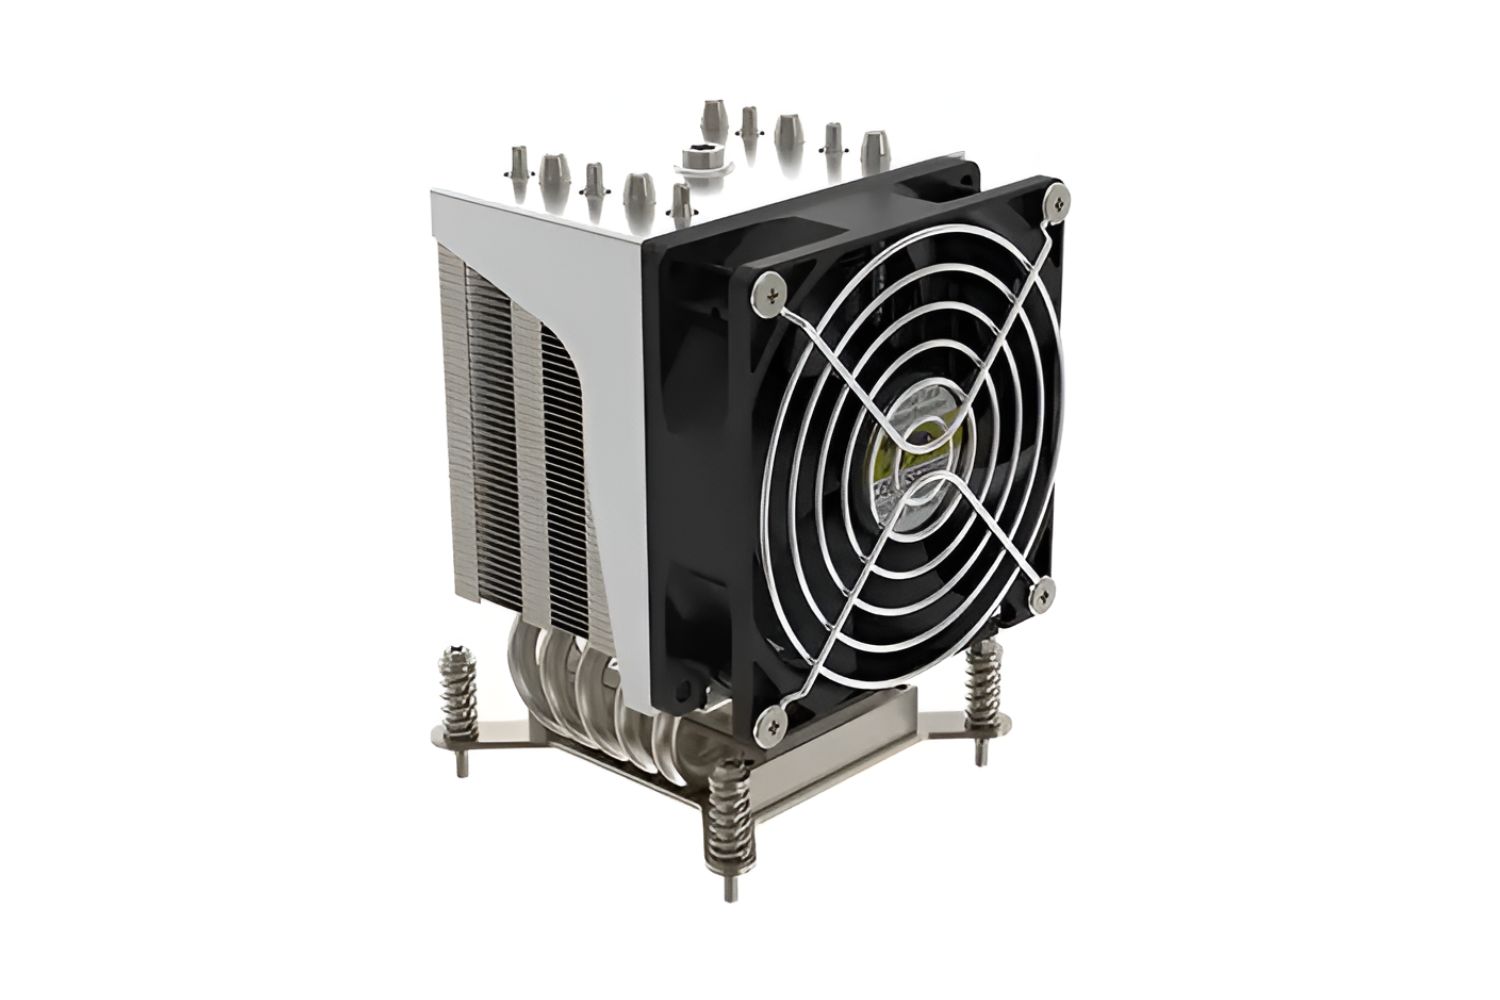 heat-pipes-are-used-in-what-kind-of-cpu-cooler-active-cooler